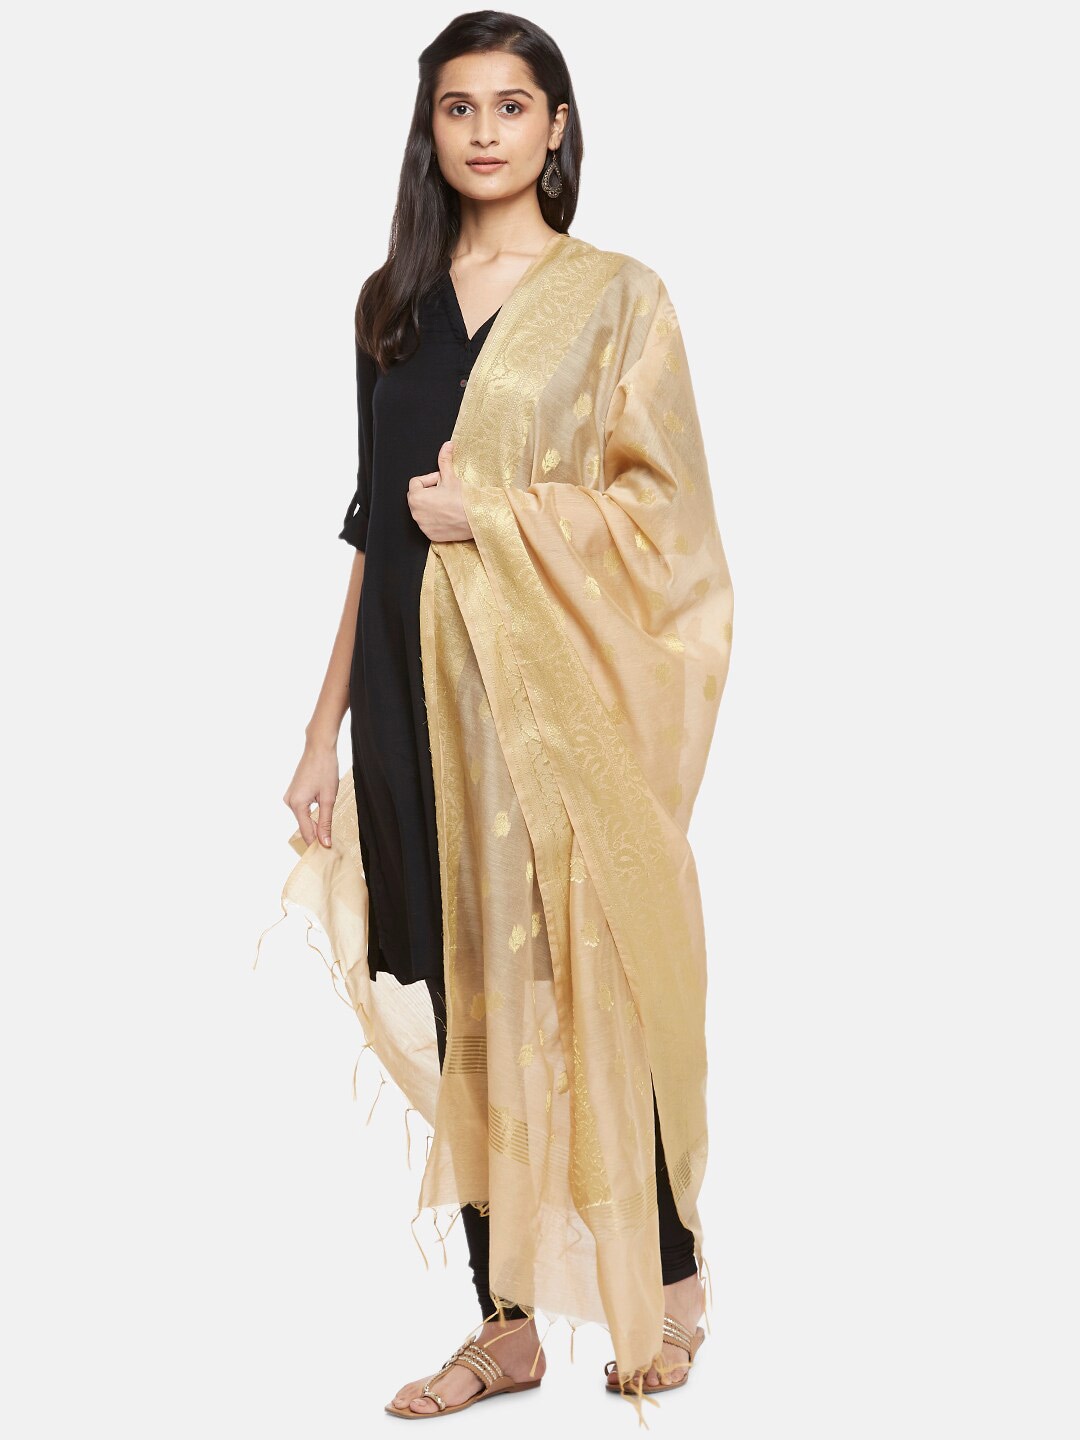 RANGMANCH BY PANTALOONS Gold-Toned Ethnic Motifs Woven Design Dupatta Price in India